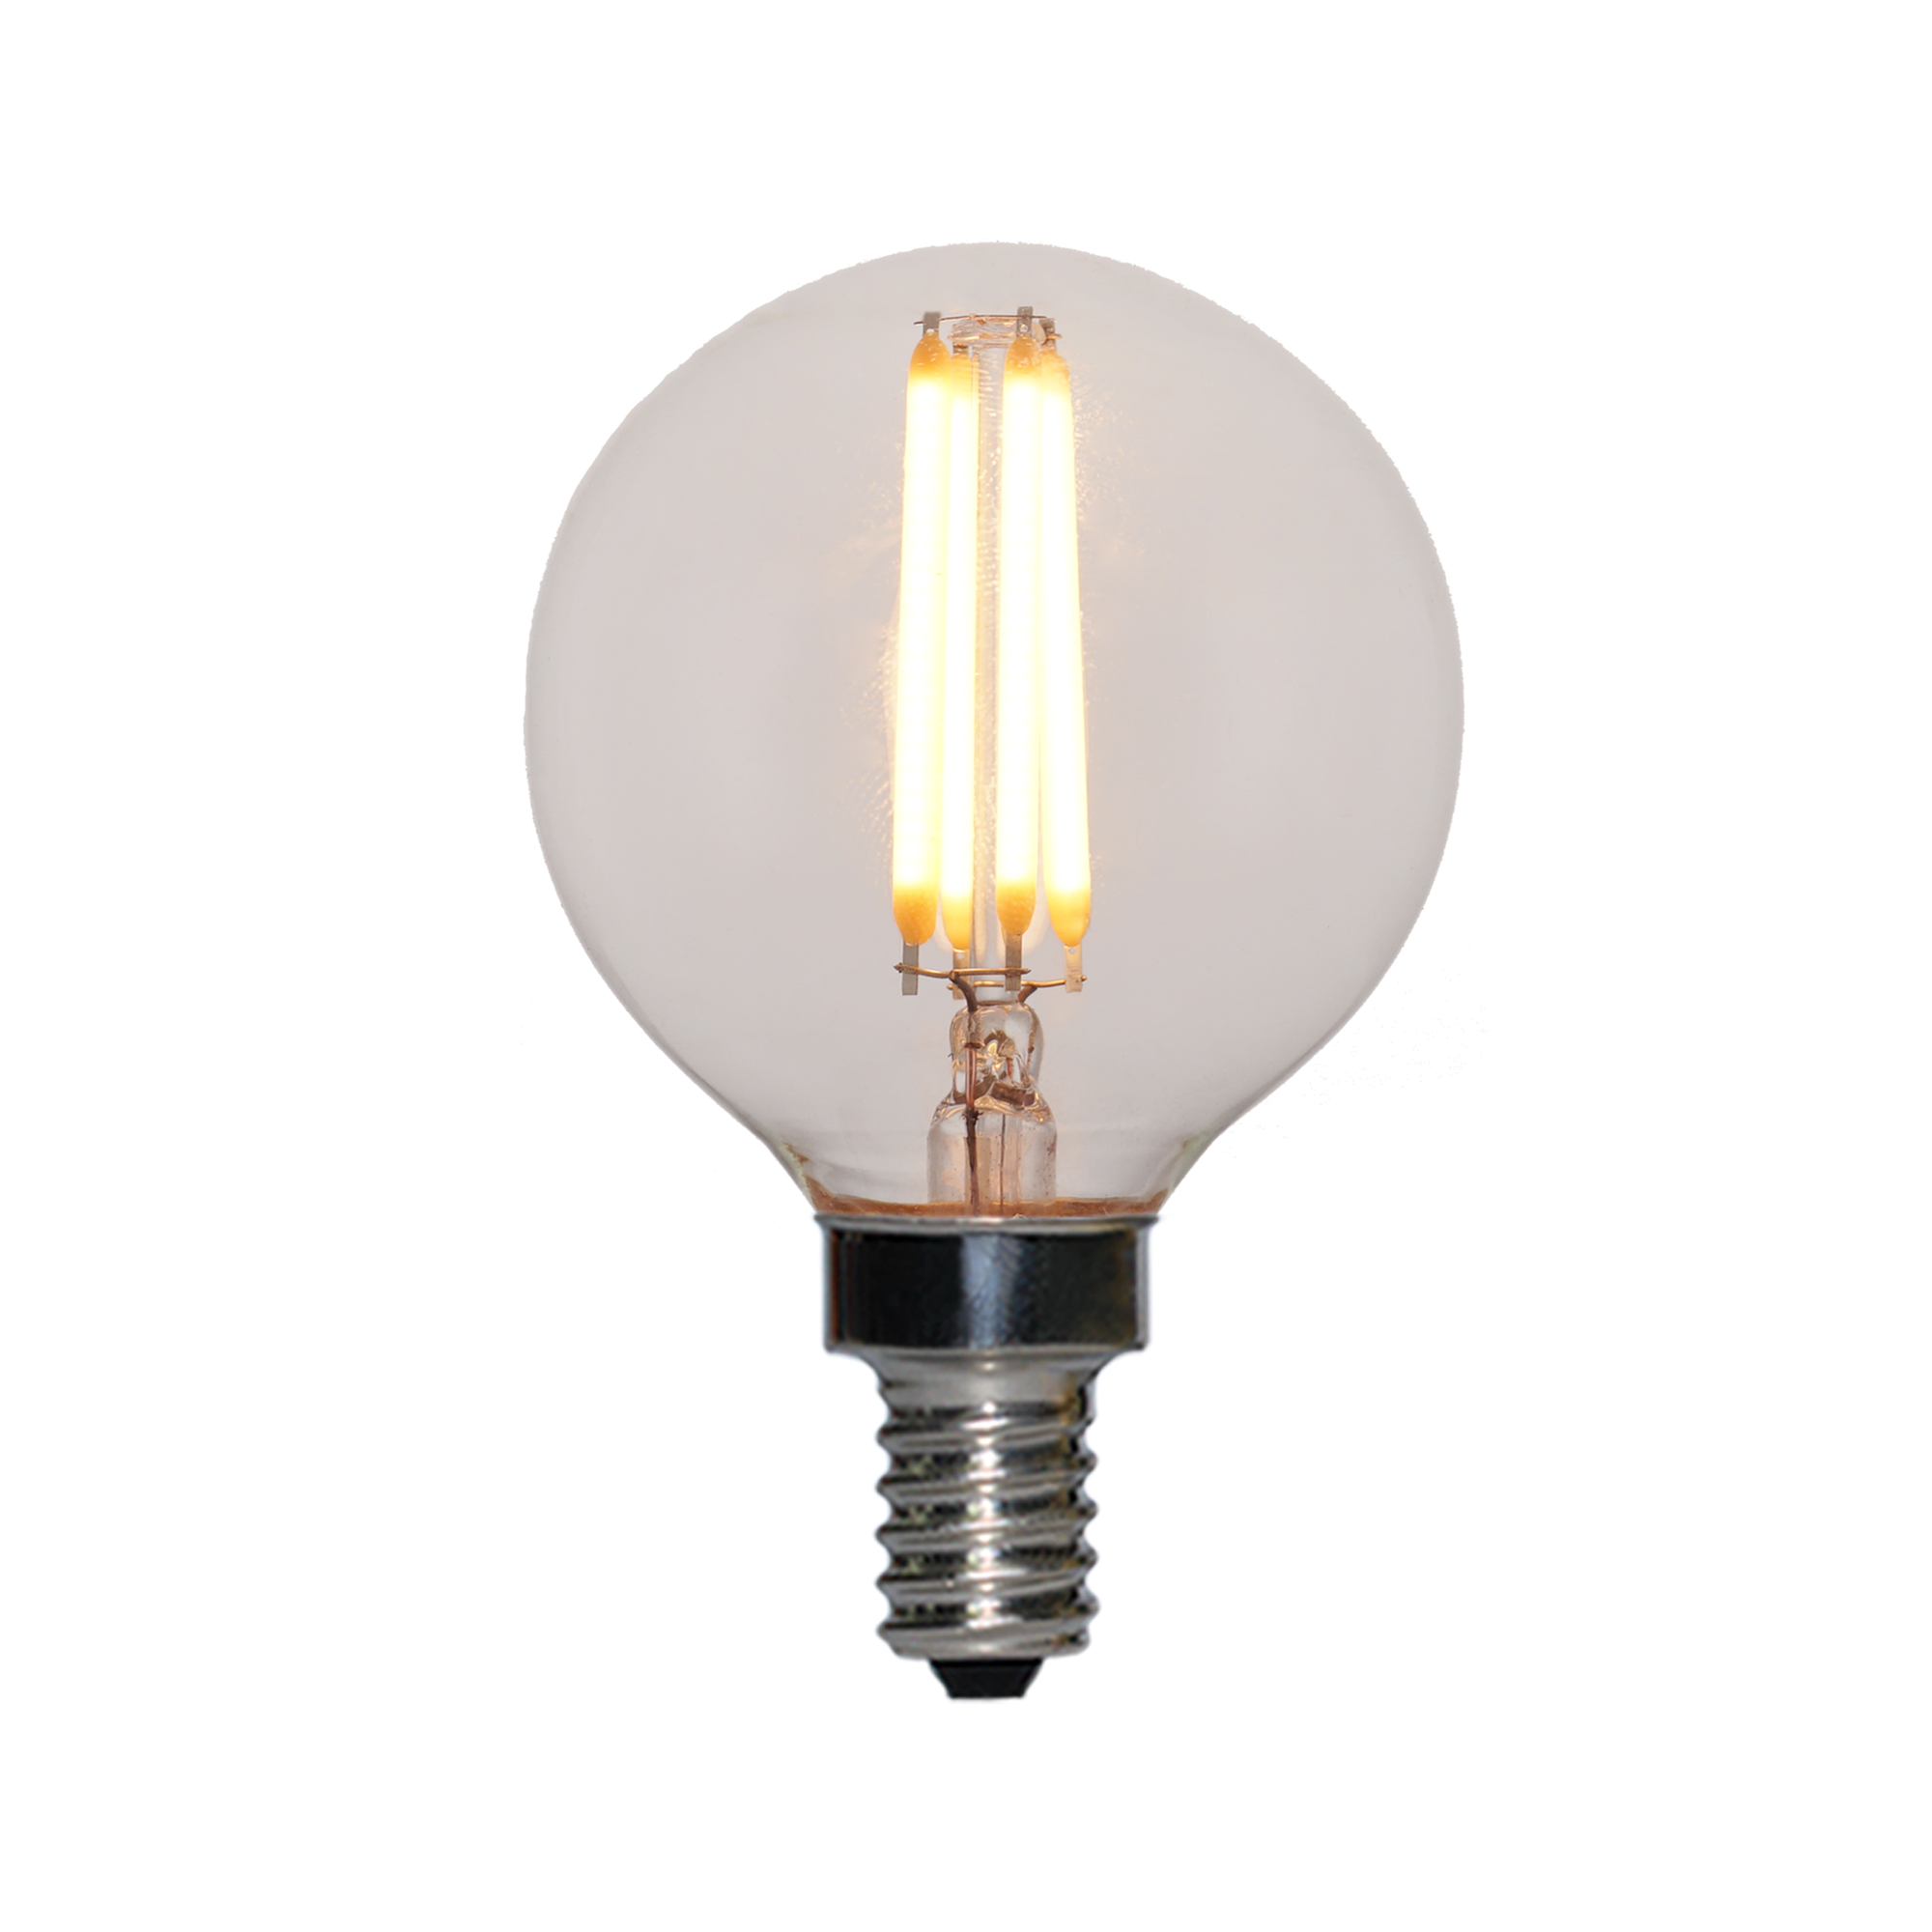 Top Quality Ul List Edison Bulb Manufacturer – UL ES title 20, Title 24 and JA8 Certified  listed led Edison bulbs G16.5 A19 S19 S21 G25 G30 G40  – Omita